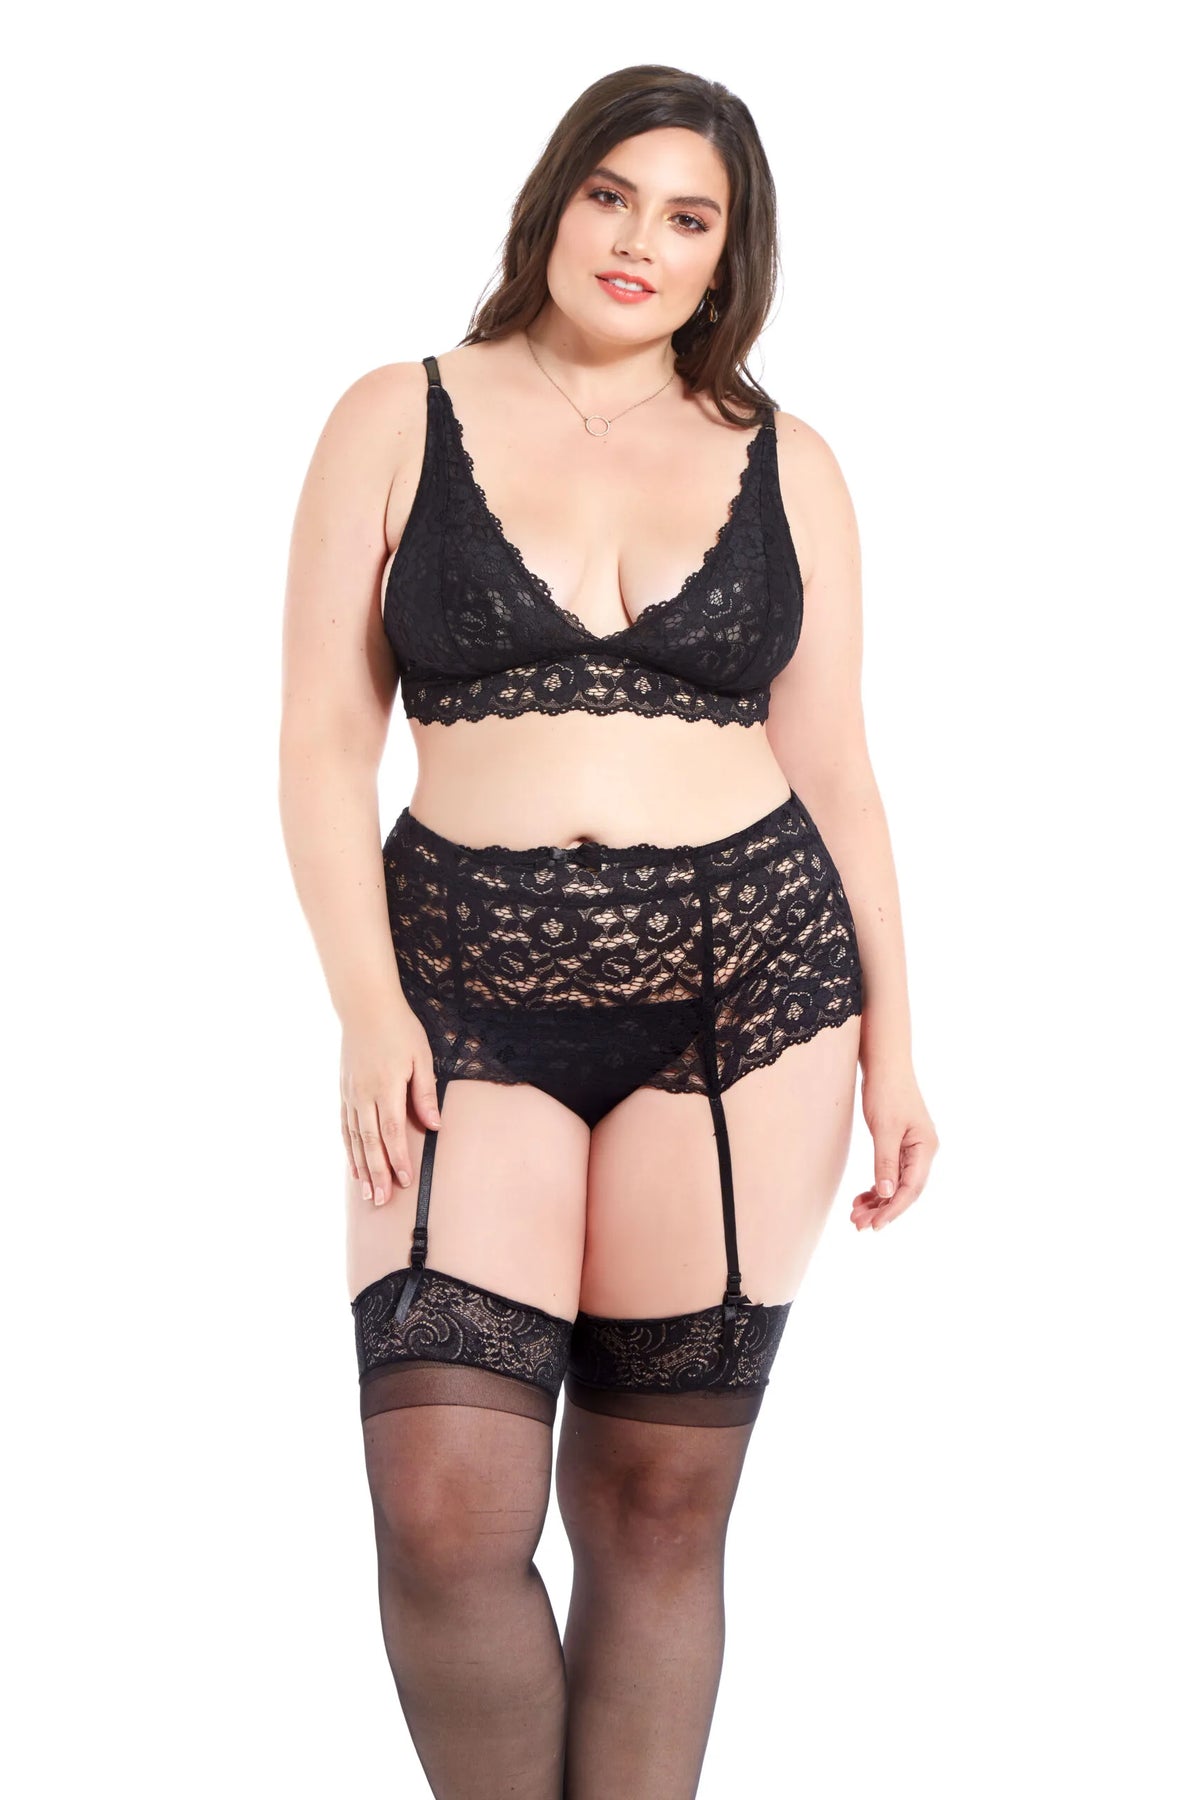 Rochelle Full-Coverage Lace Garter (shown with bra) at Belle Lacet Lingerie.